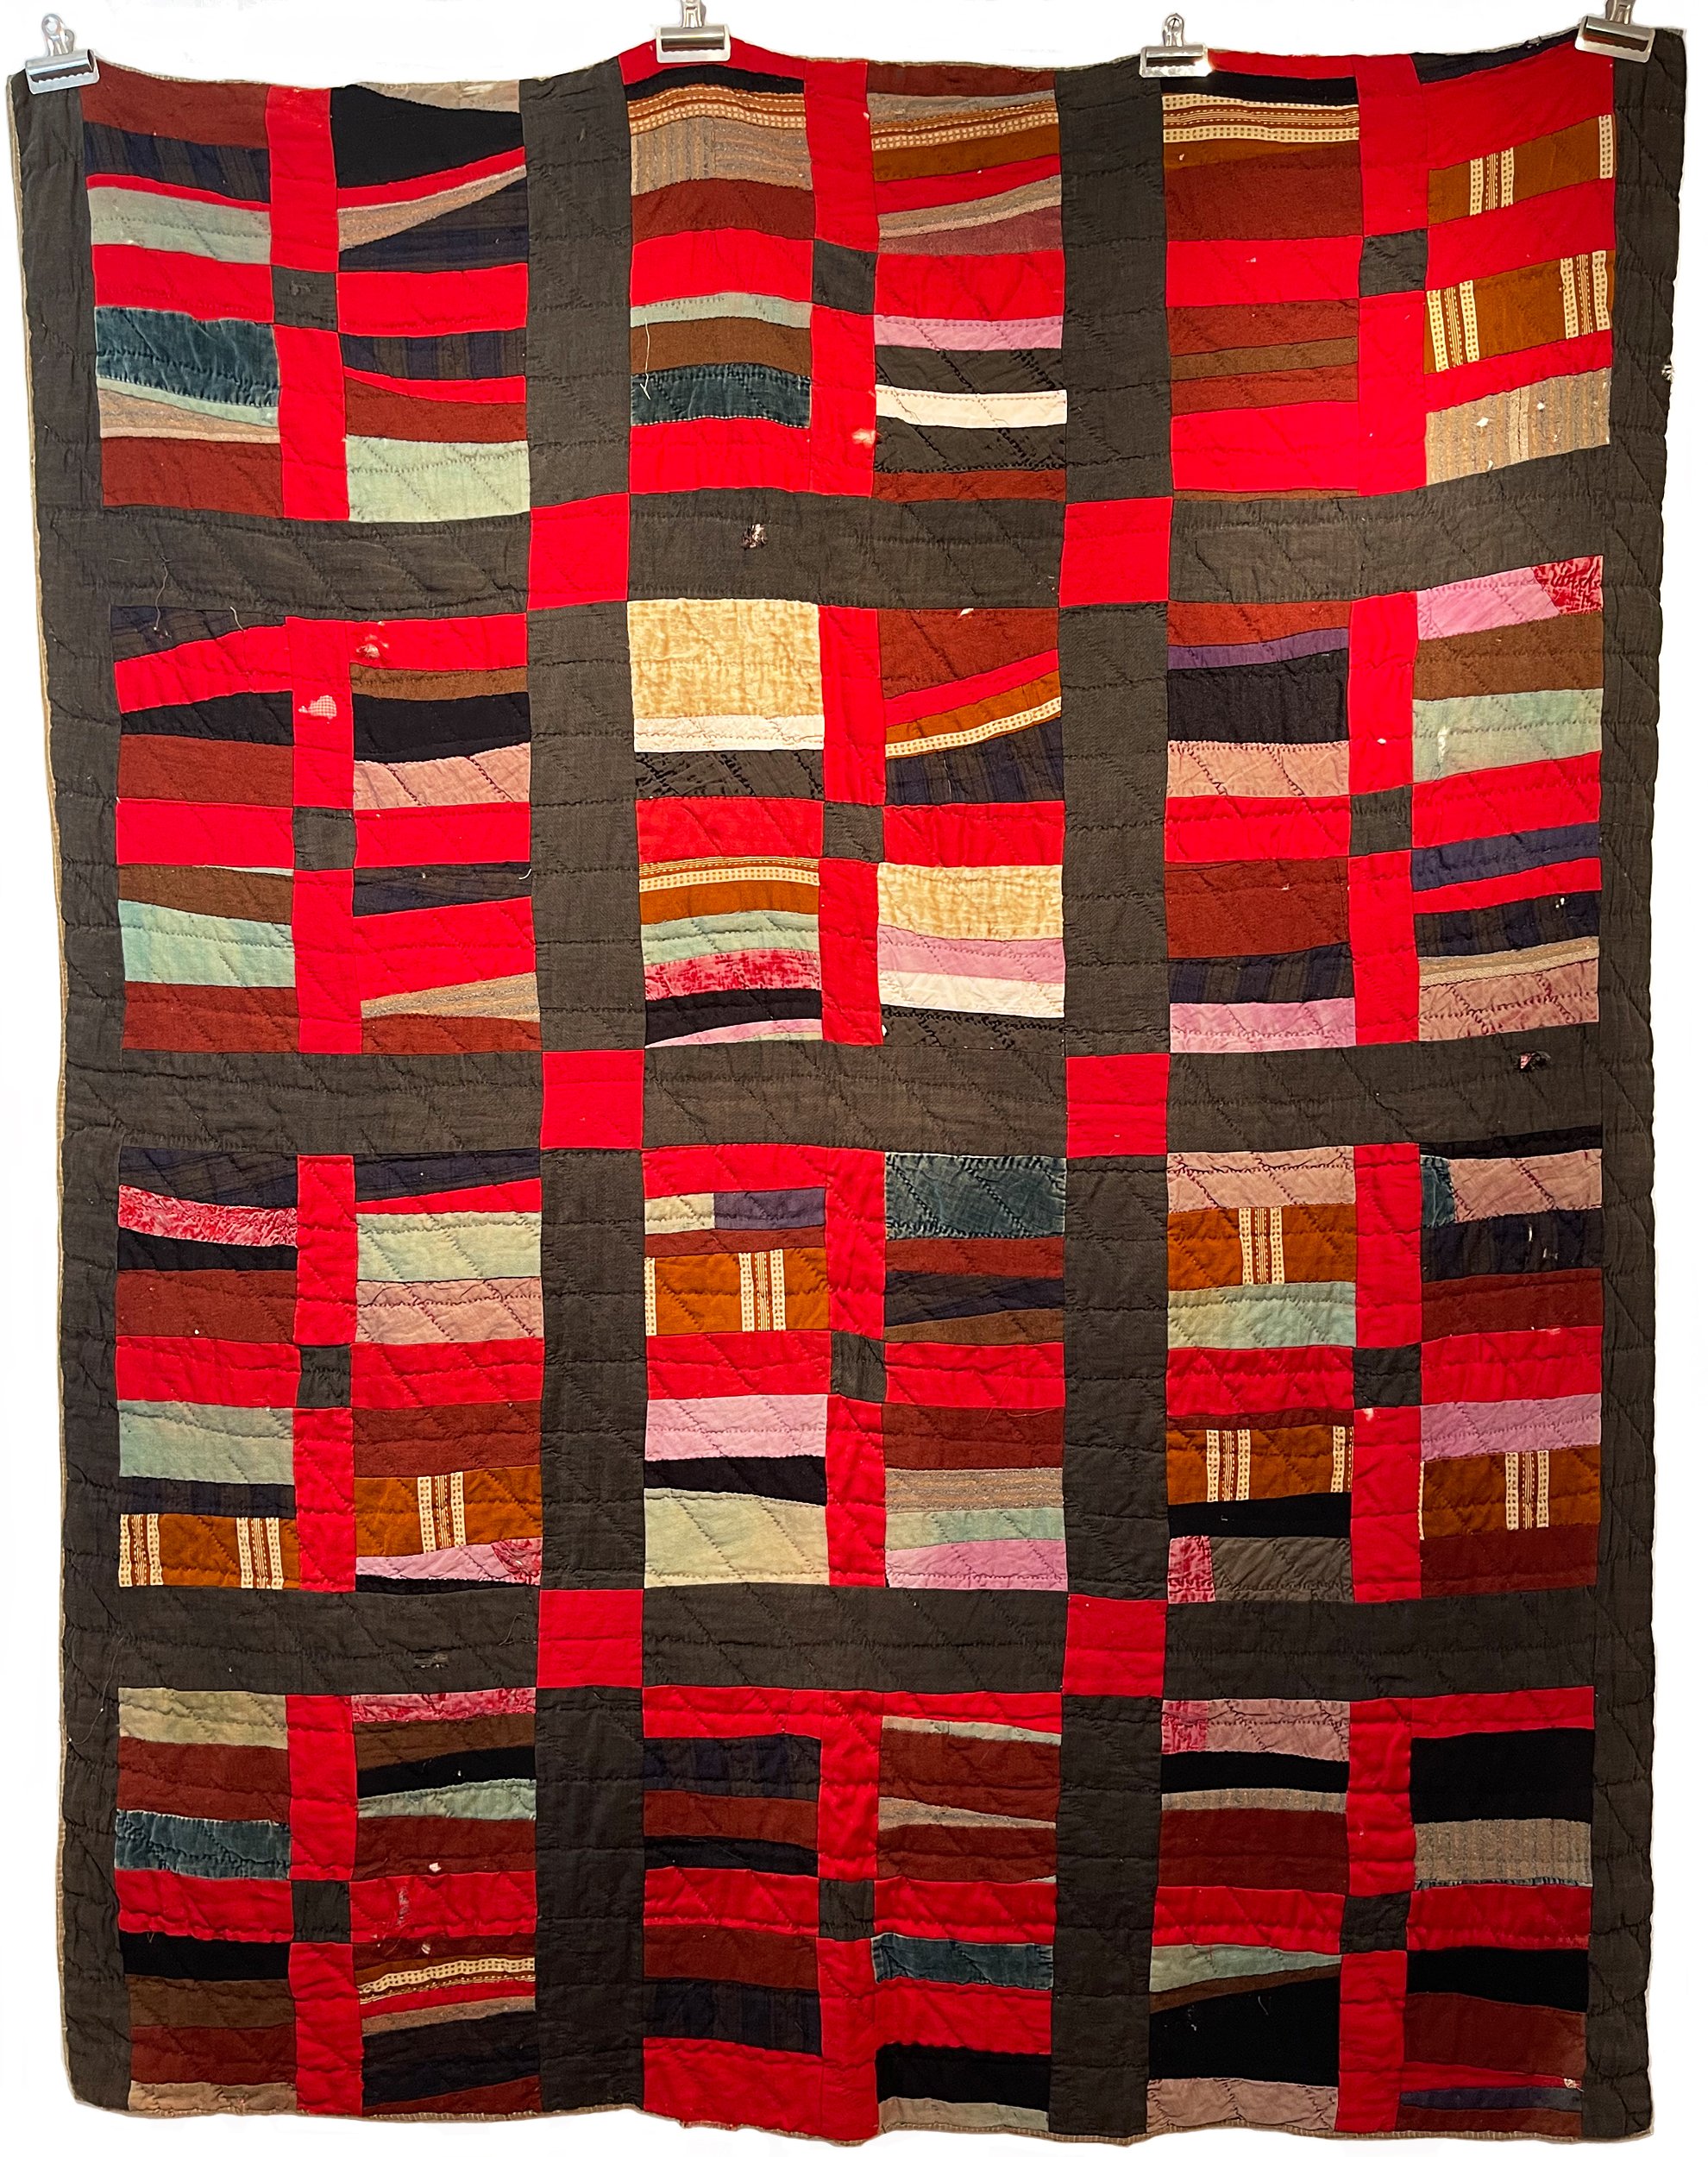   Quilt #147   ca. 1950s  84” x 65”  Various fabrics  Machine pieced, hand quilted  From Kentucky    ASK ABOUT THIS QUILT   